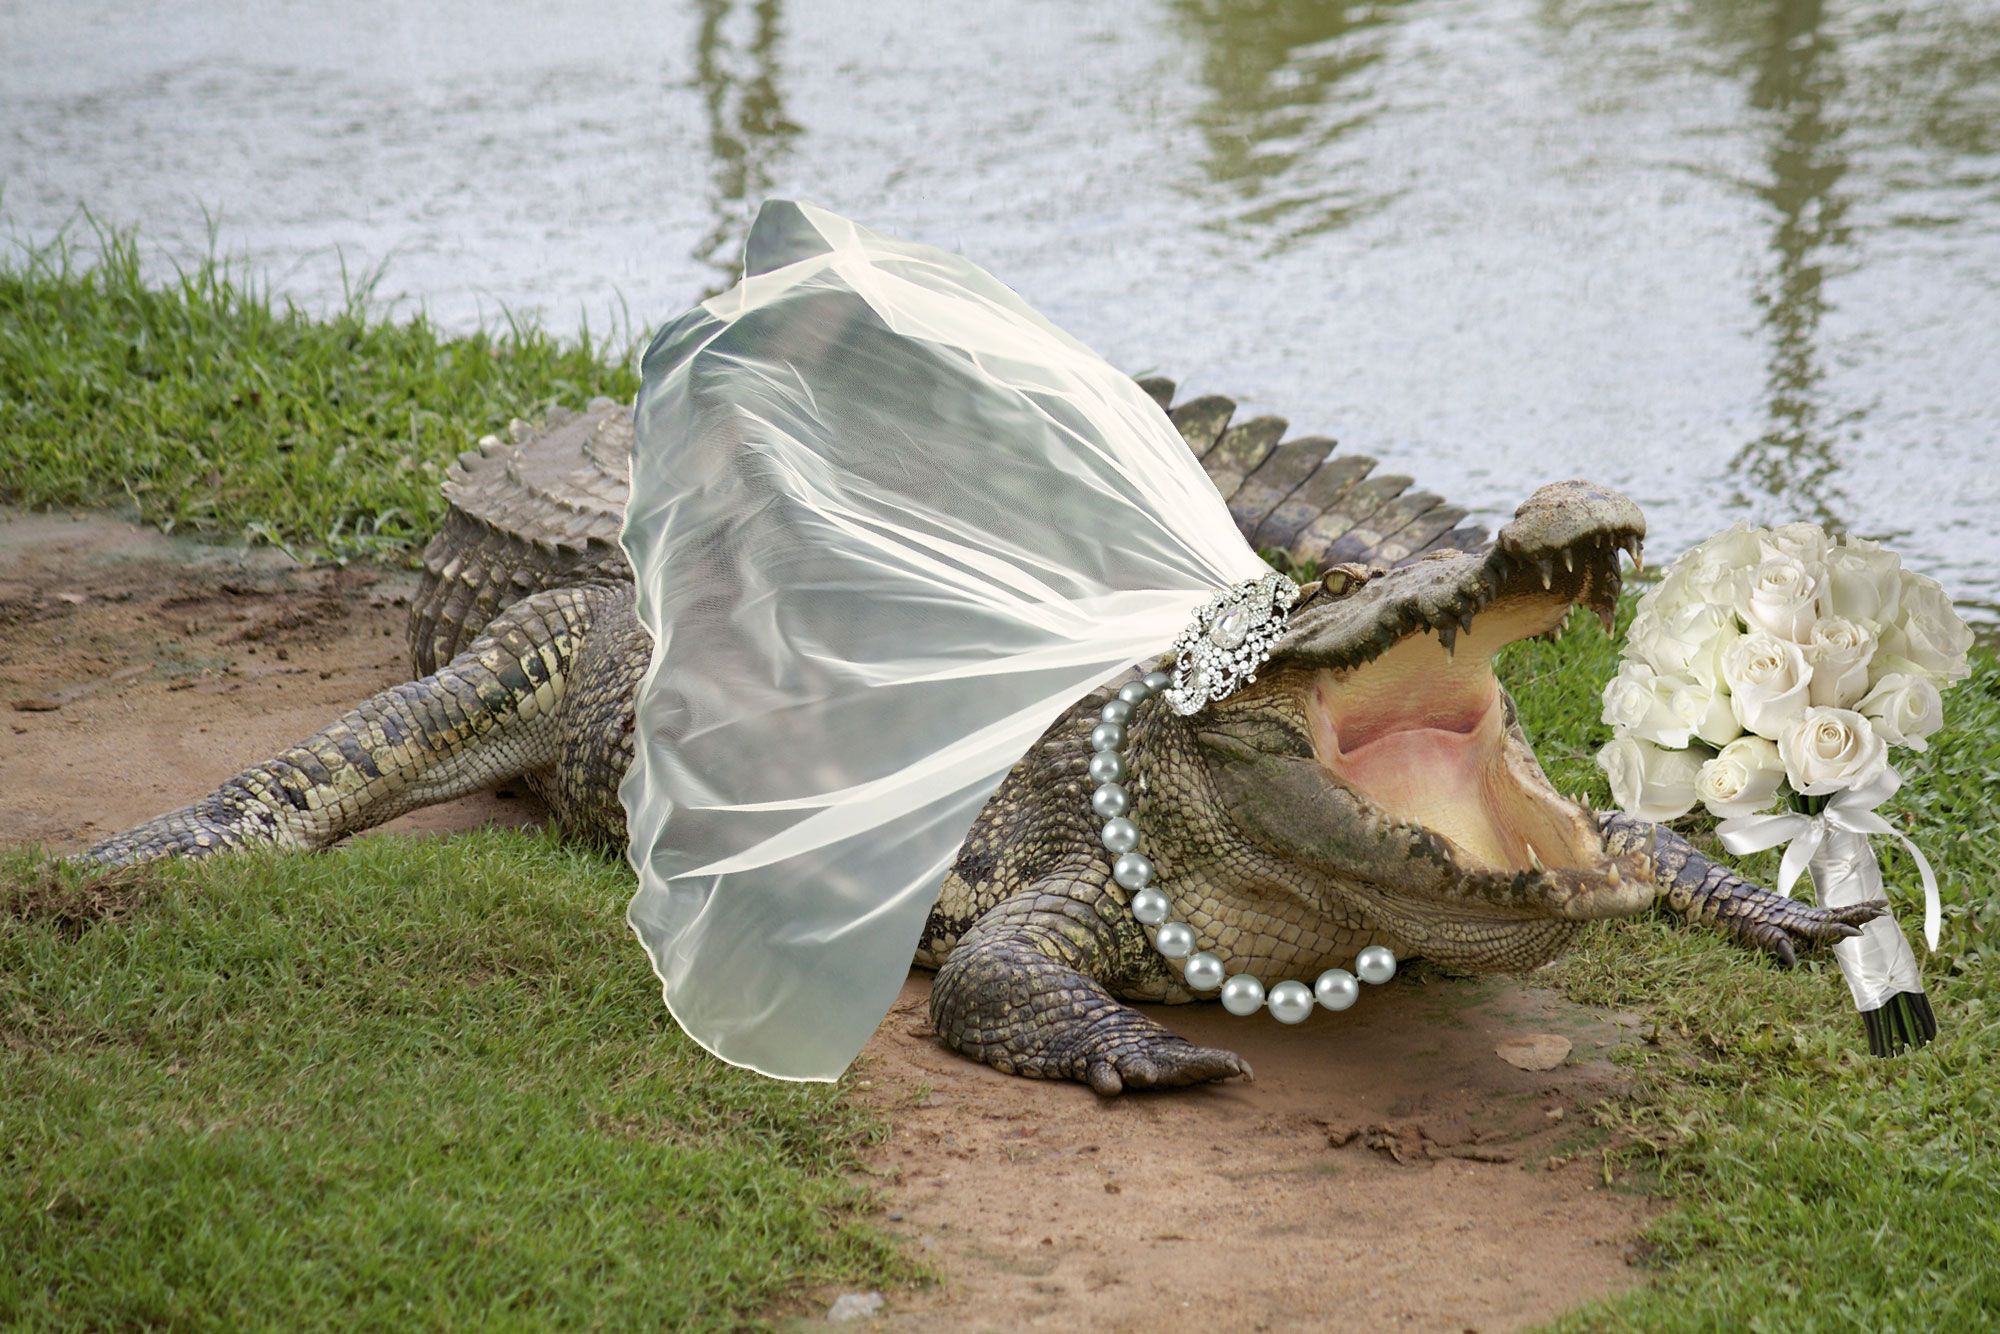 Mexican indigenous leader marries alligator bride in the astonishing ceremony